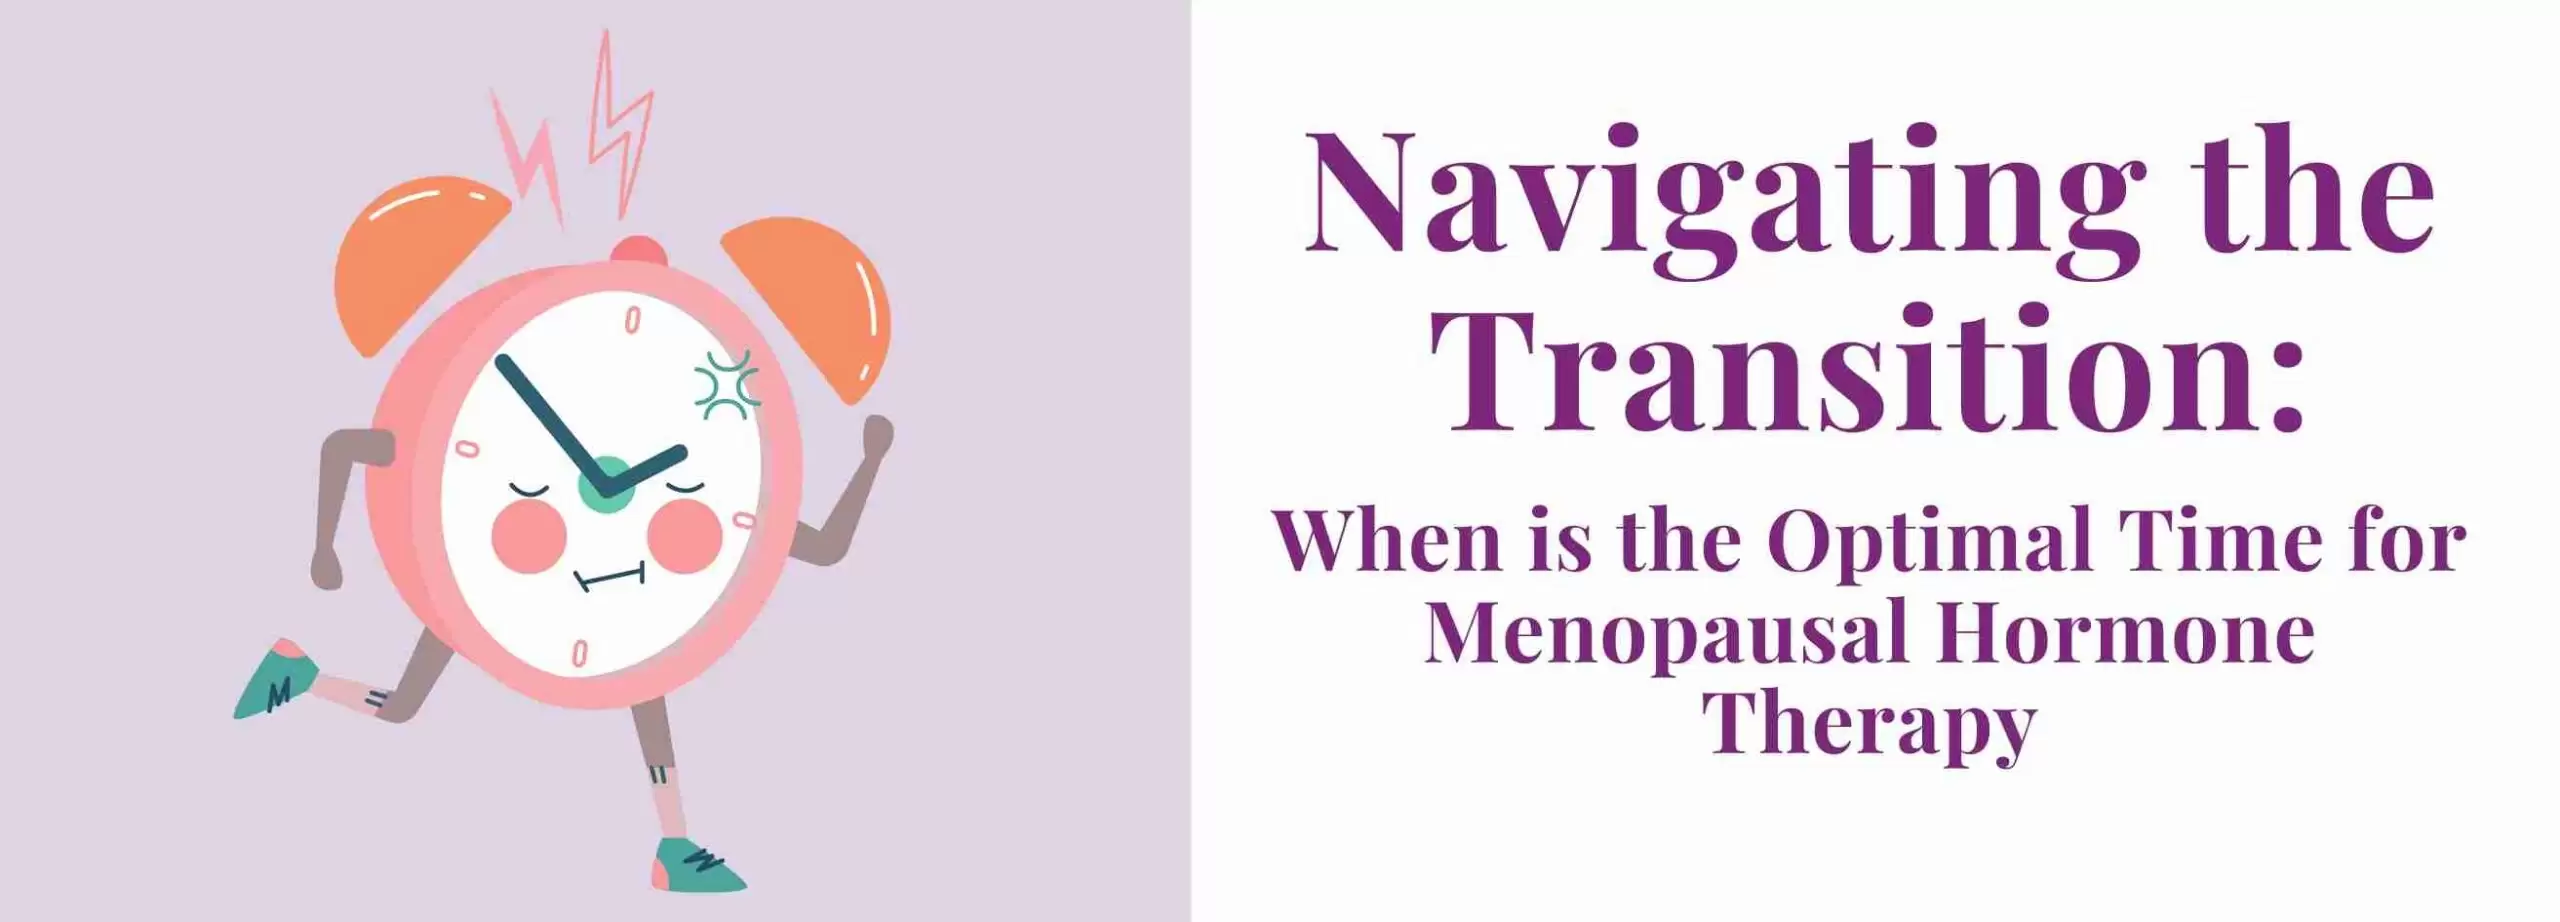 Navigating the transition: when is the optimal time for Menopausal Hormone Therapy